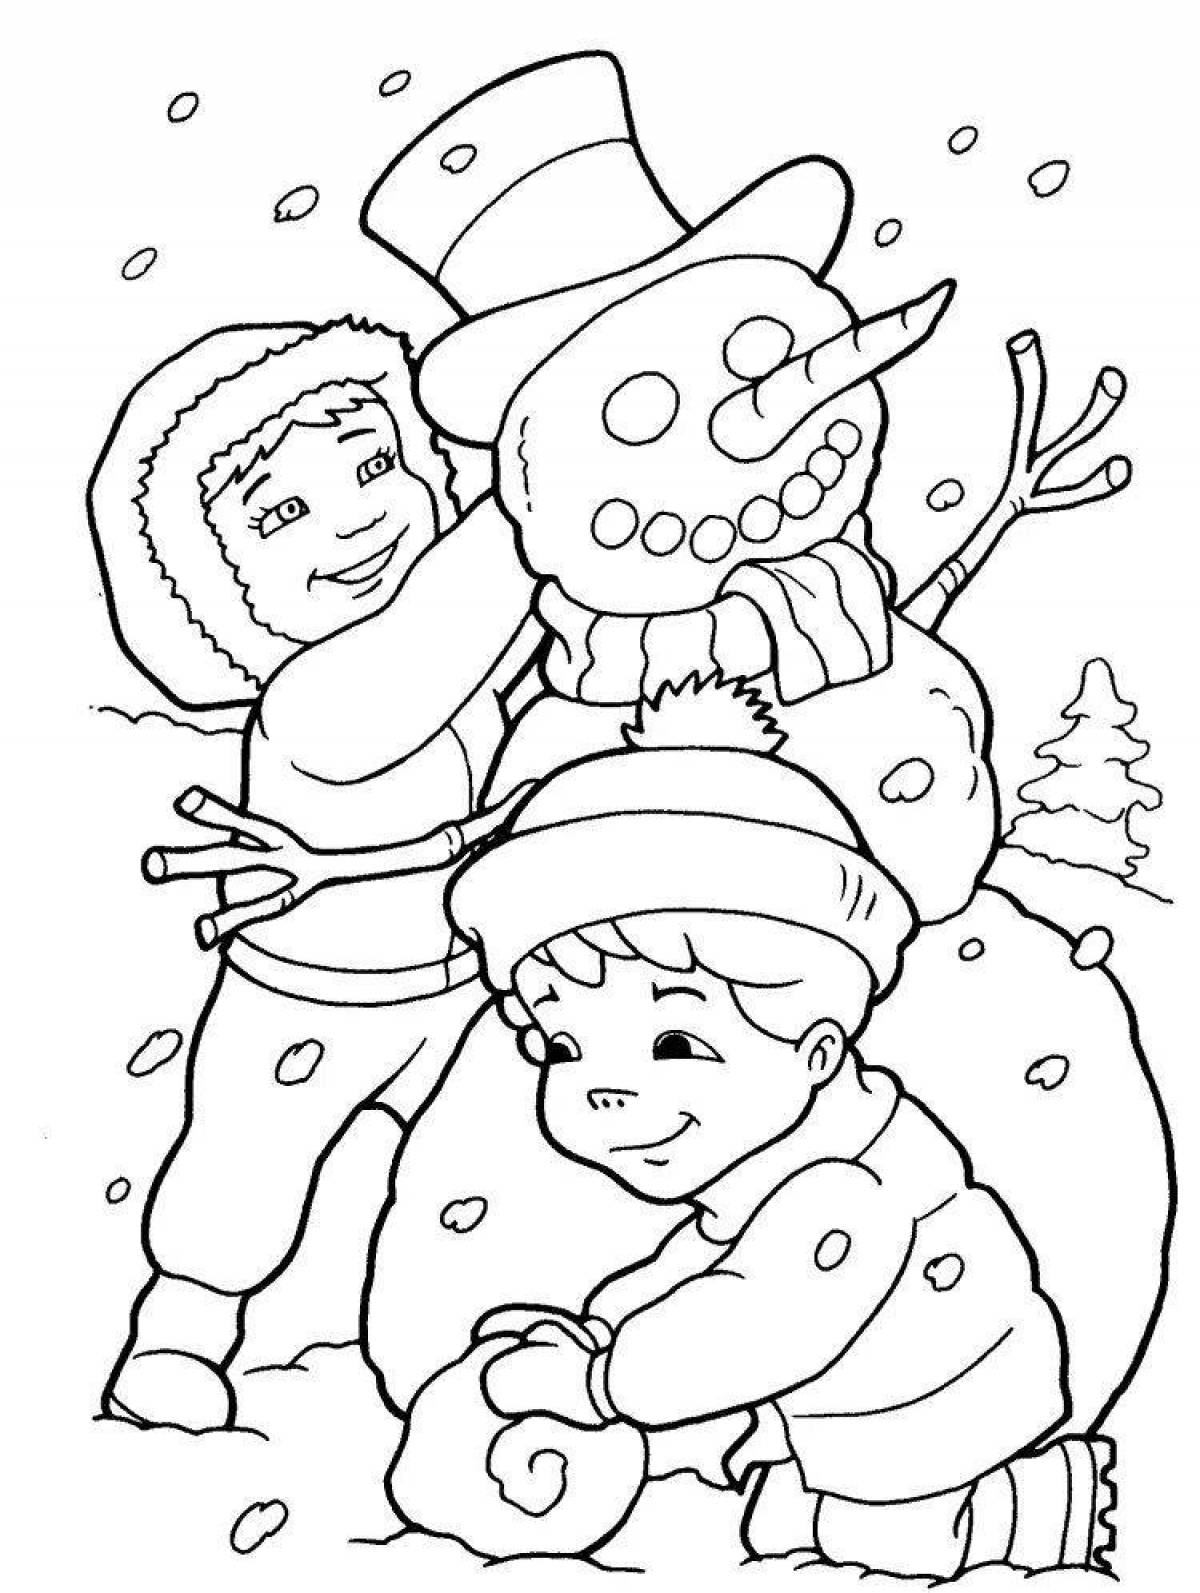 Colouring bright winter activities